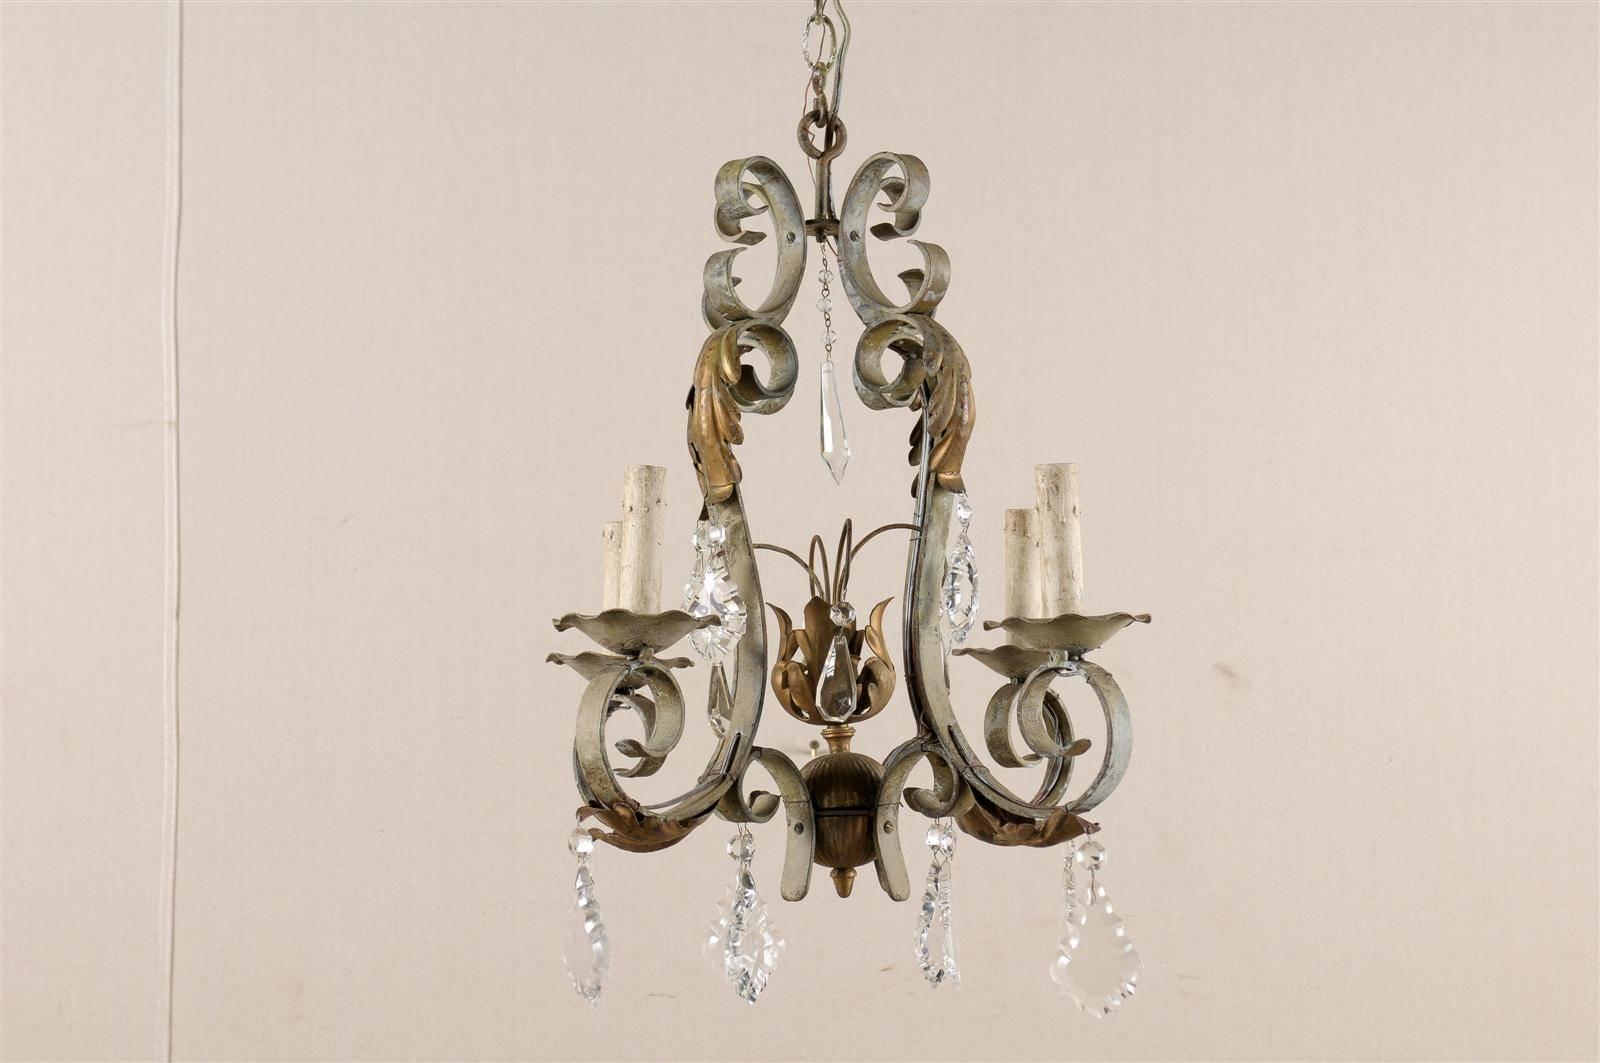 A French vintage crystal and painted iron four-light chandelier. This French mid-20th century chandelier is made of four S-scroll arms with gilded acanthus leaves, supporting the flower shaped bobèches. The four arms are topped with C-scrolls from